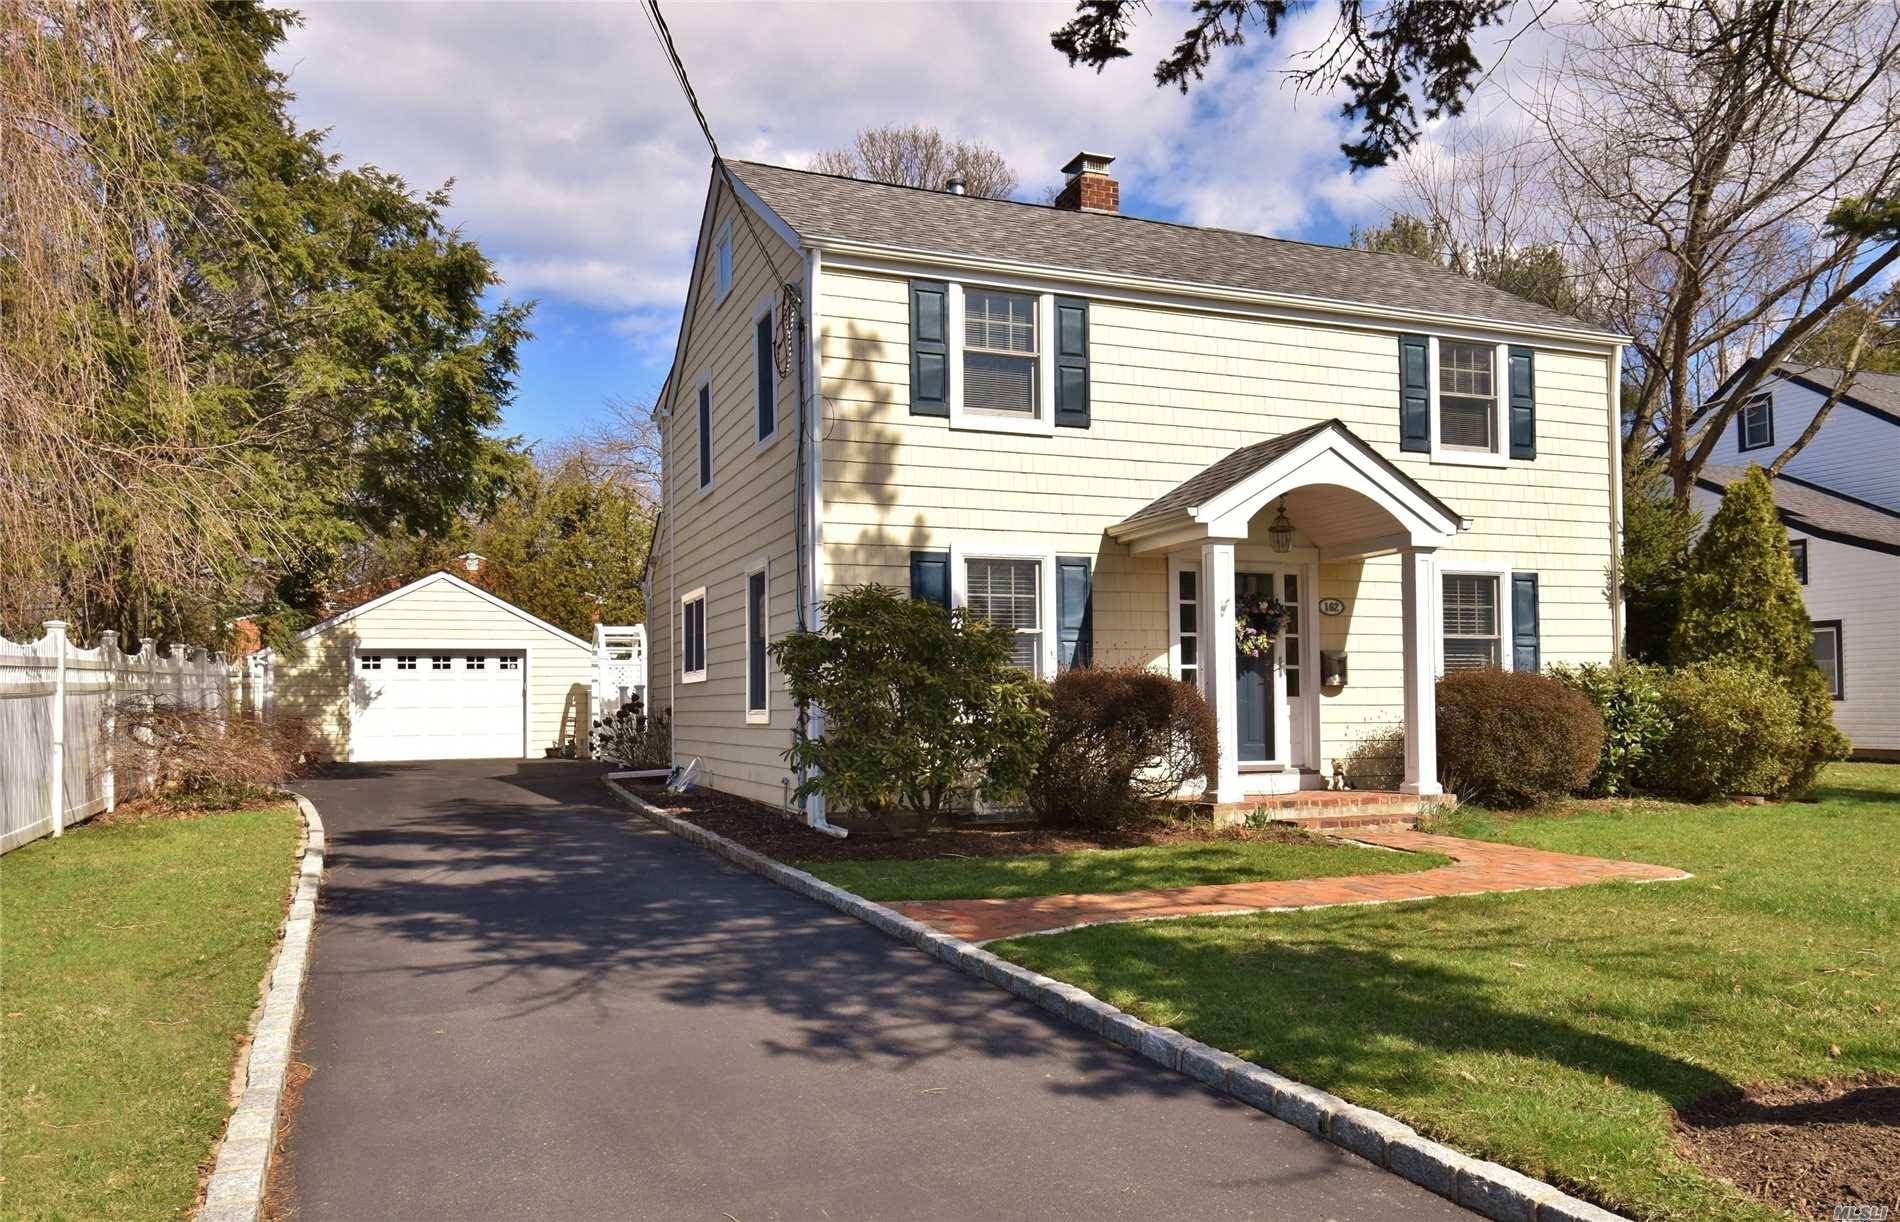 Charming Village Colonial Located Just North Of Downtown Huntington.